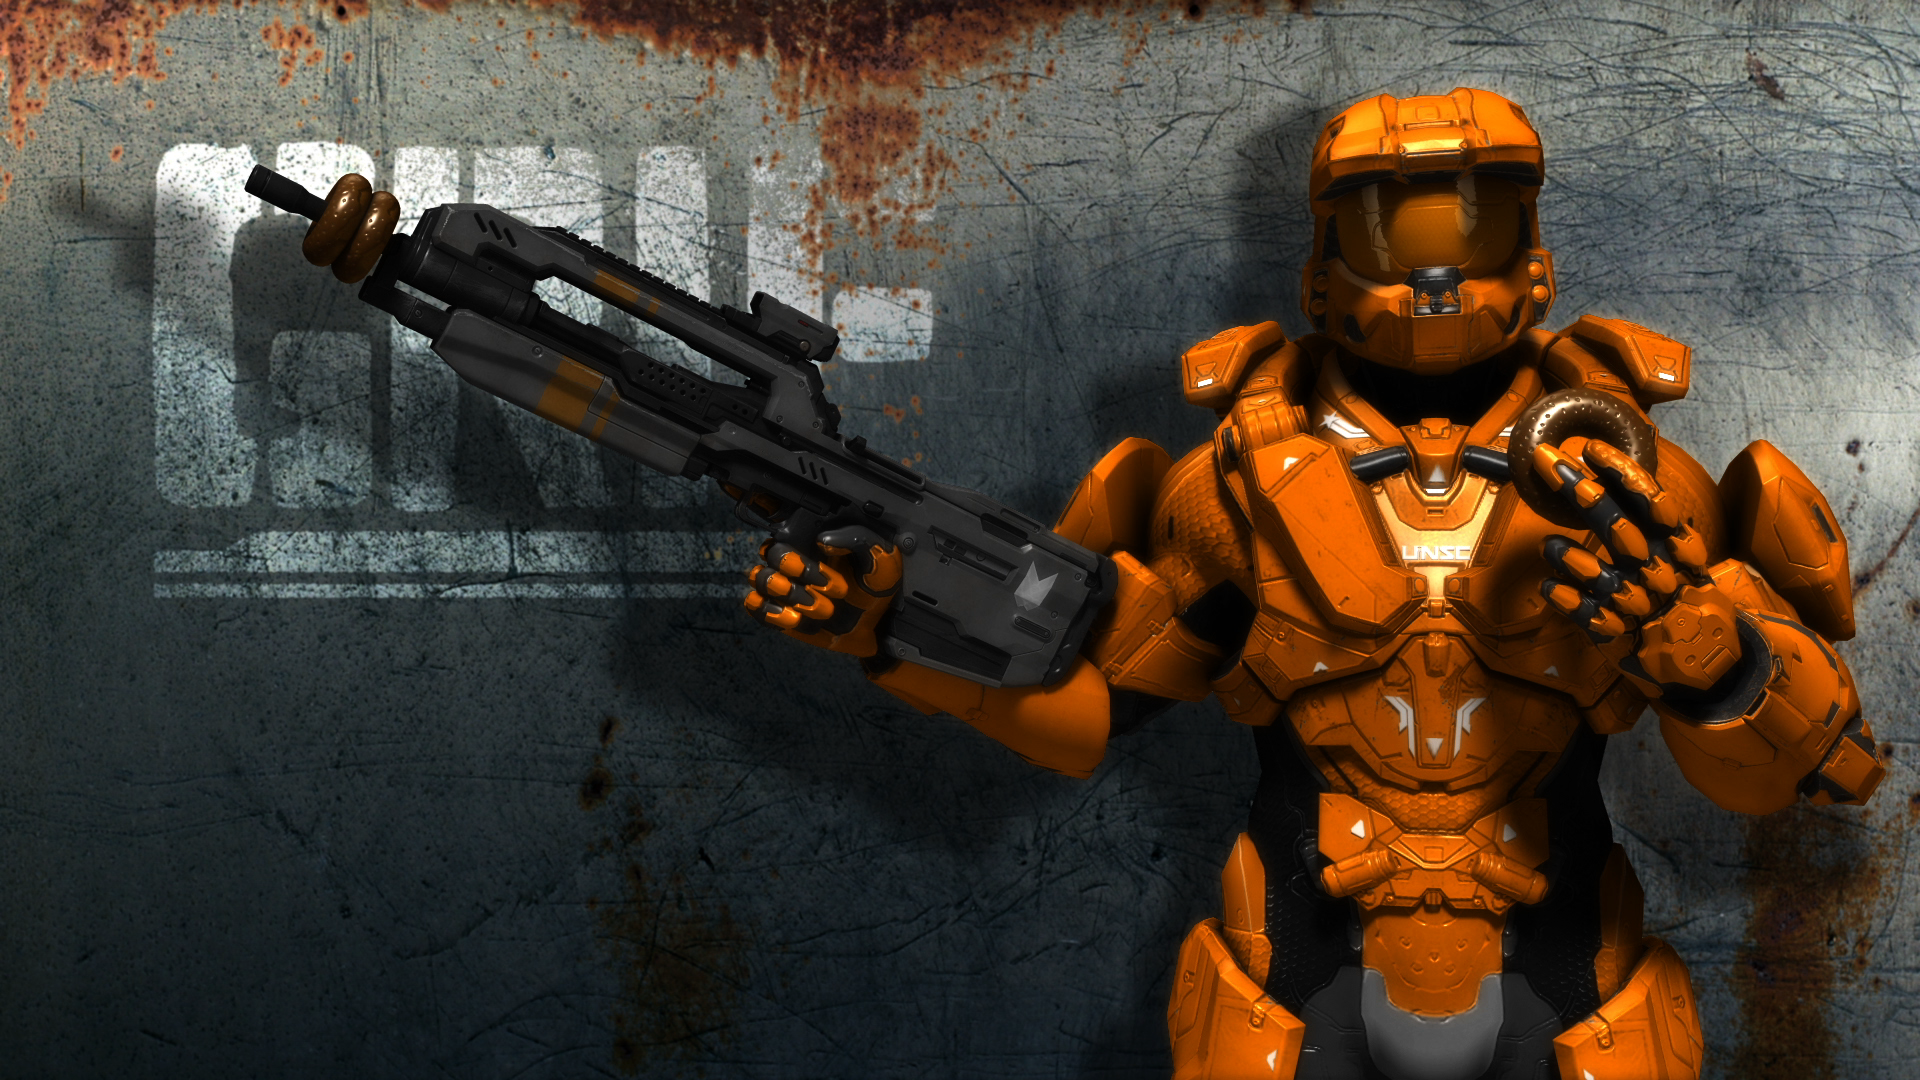  Red vs Blue wallpapers and images   wallpapers pictures photos